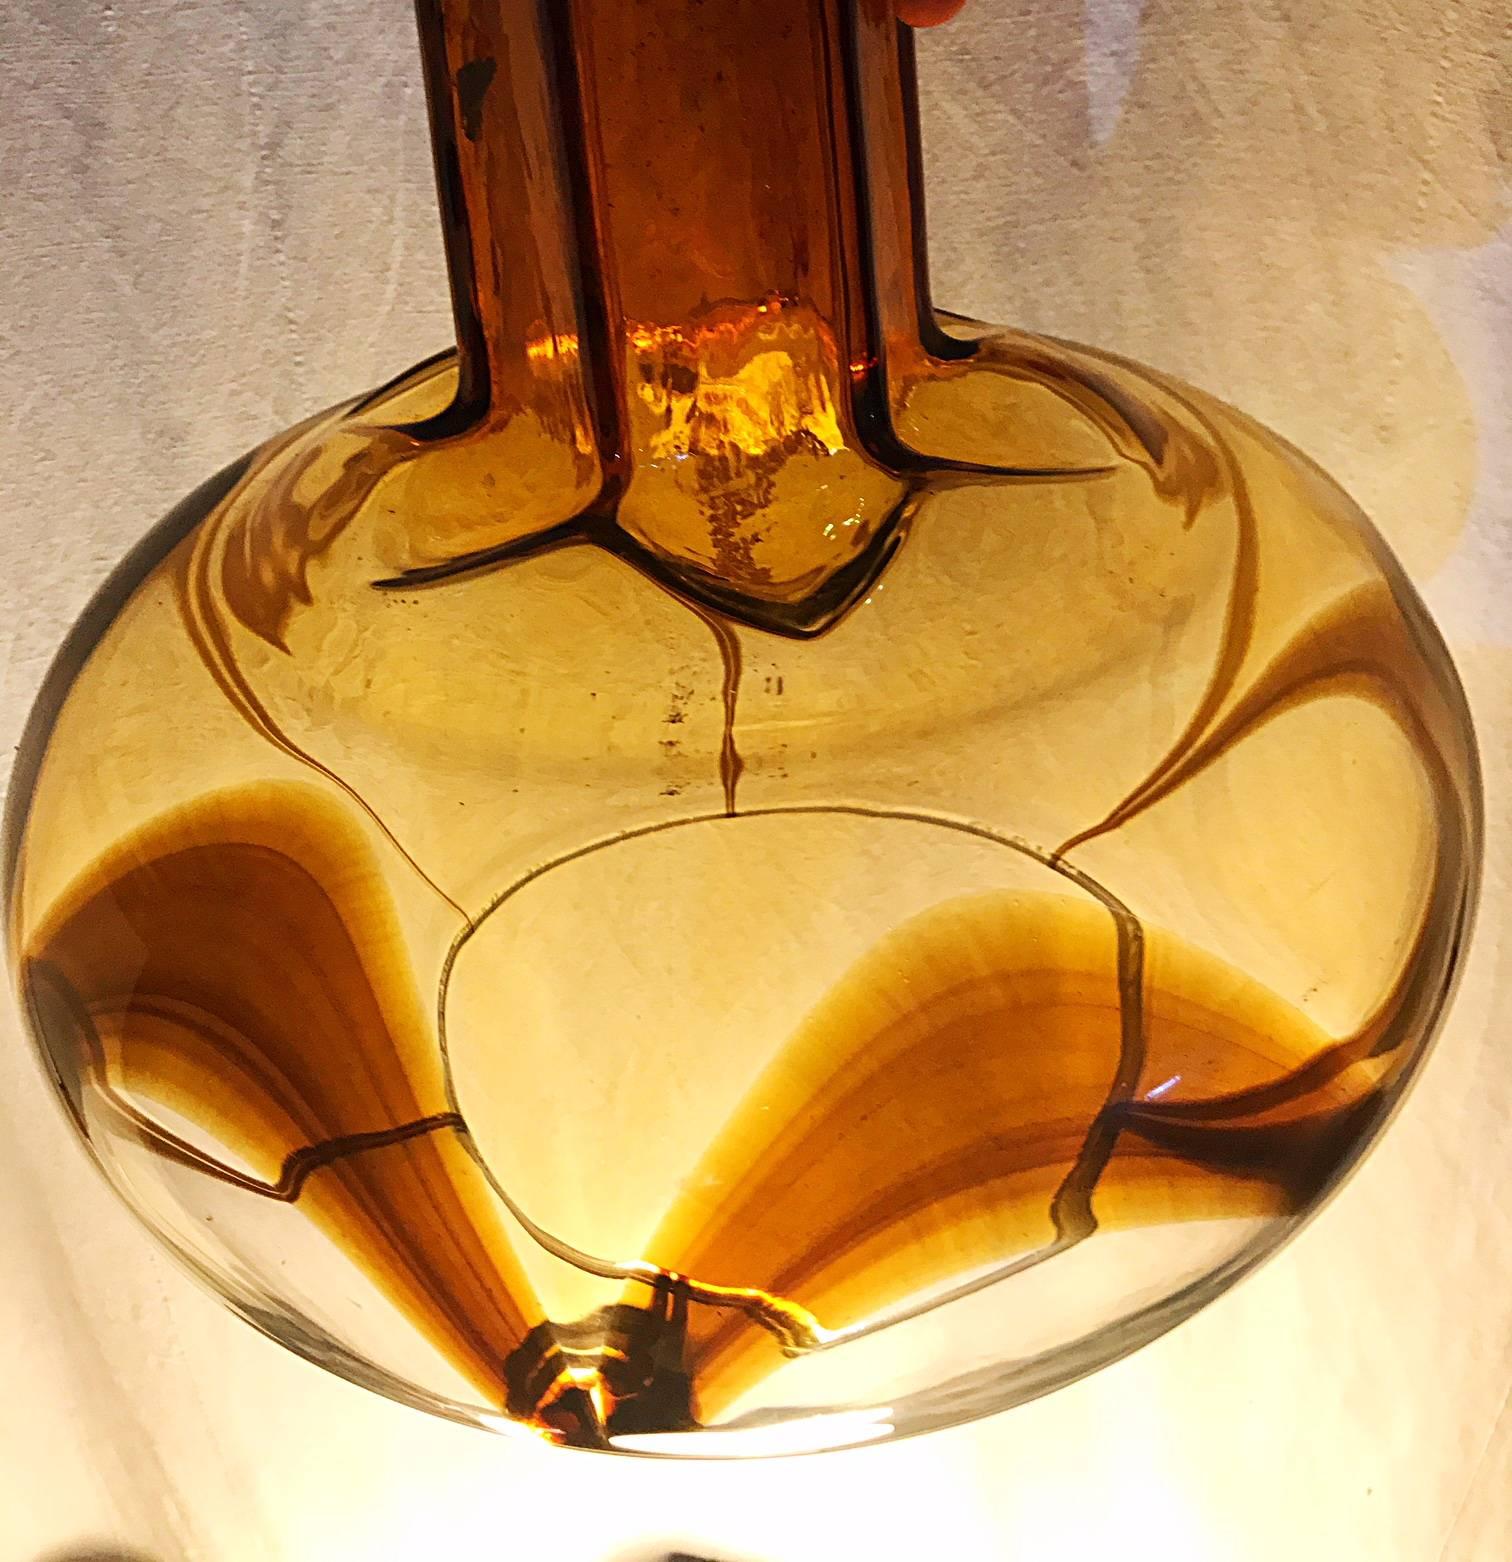 The 1970s Space Age Murano blown glass shade with a brushed steel with chain fixture adjusted.
A real stunning ORIGINAL vintage period lamp !! Model made in hand-made by the greatest glassmakers (all offers are studied) to add the international